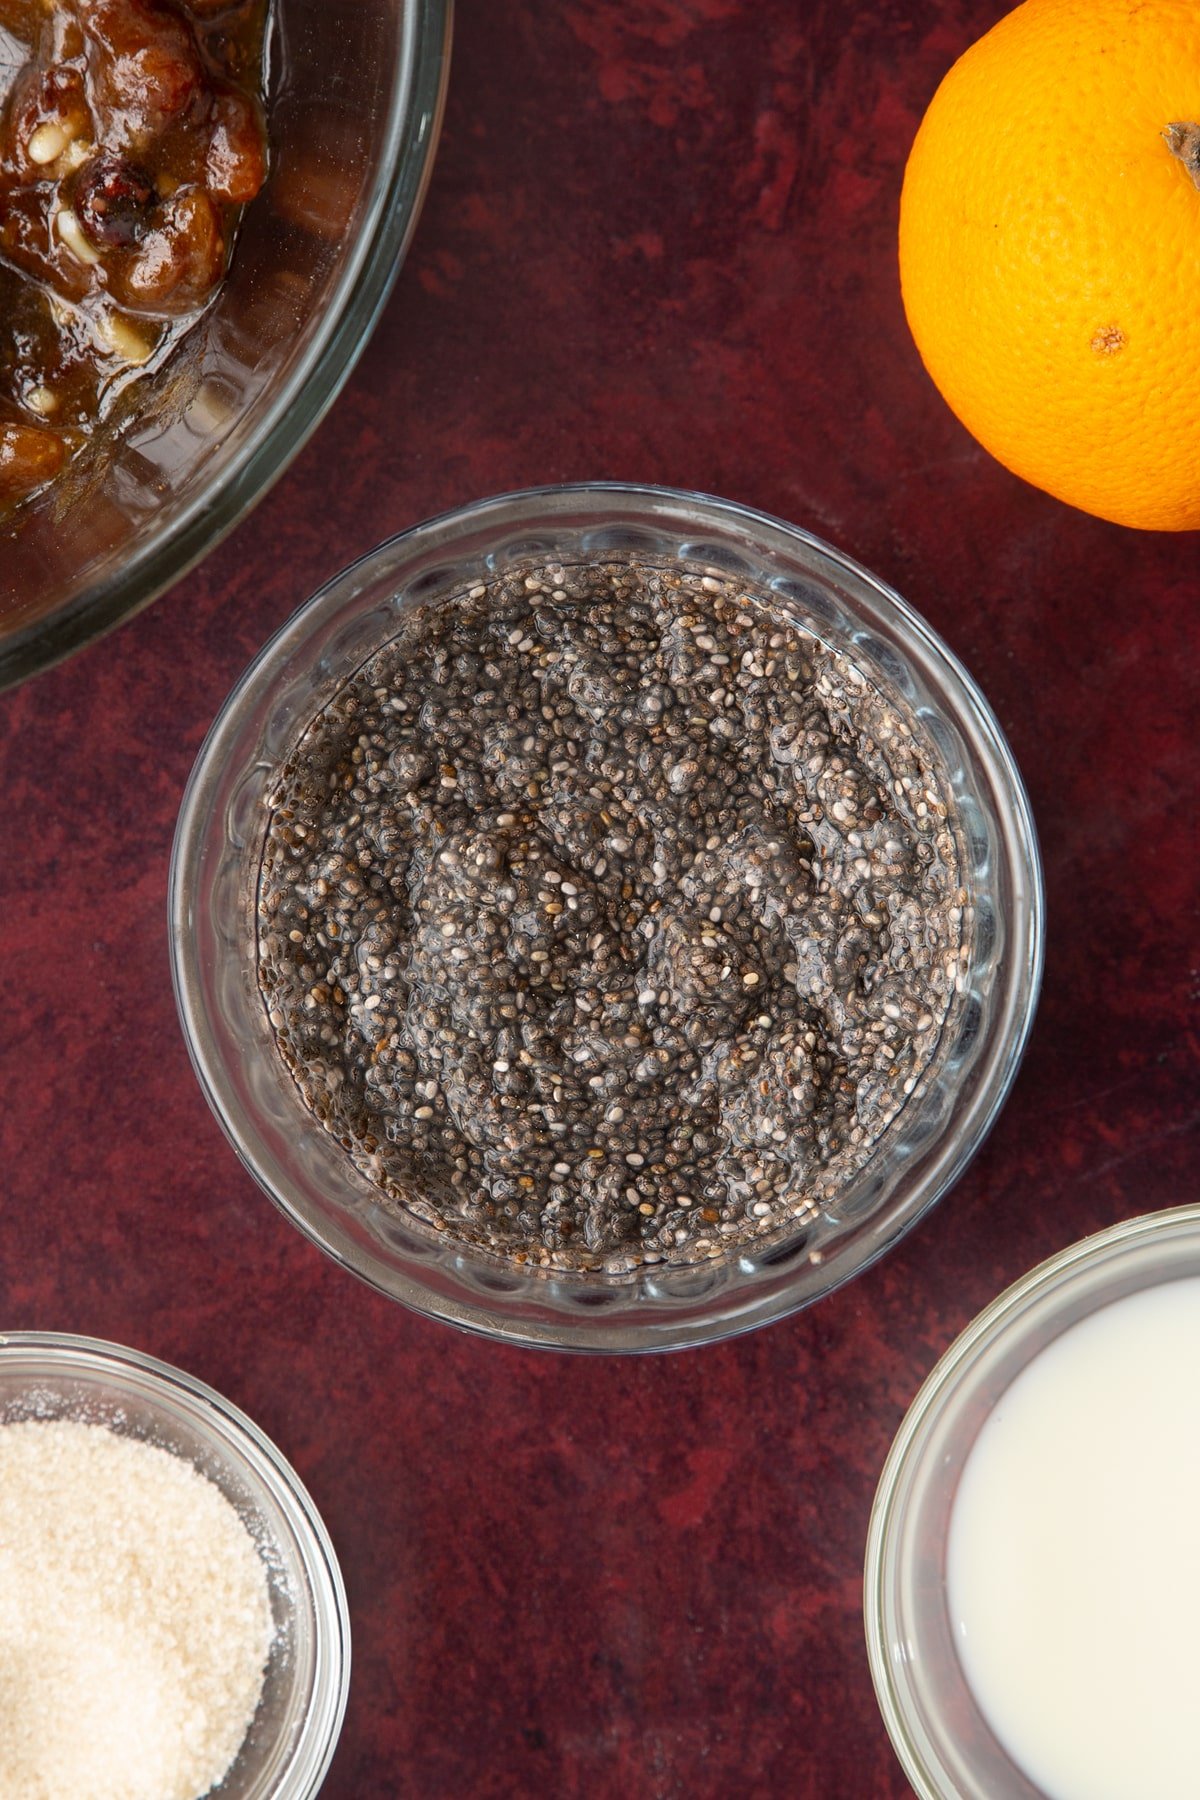 Soaked chia seeds in a small glass bowl.